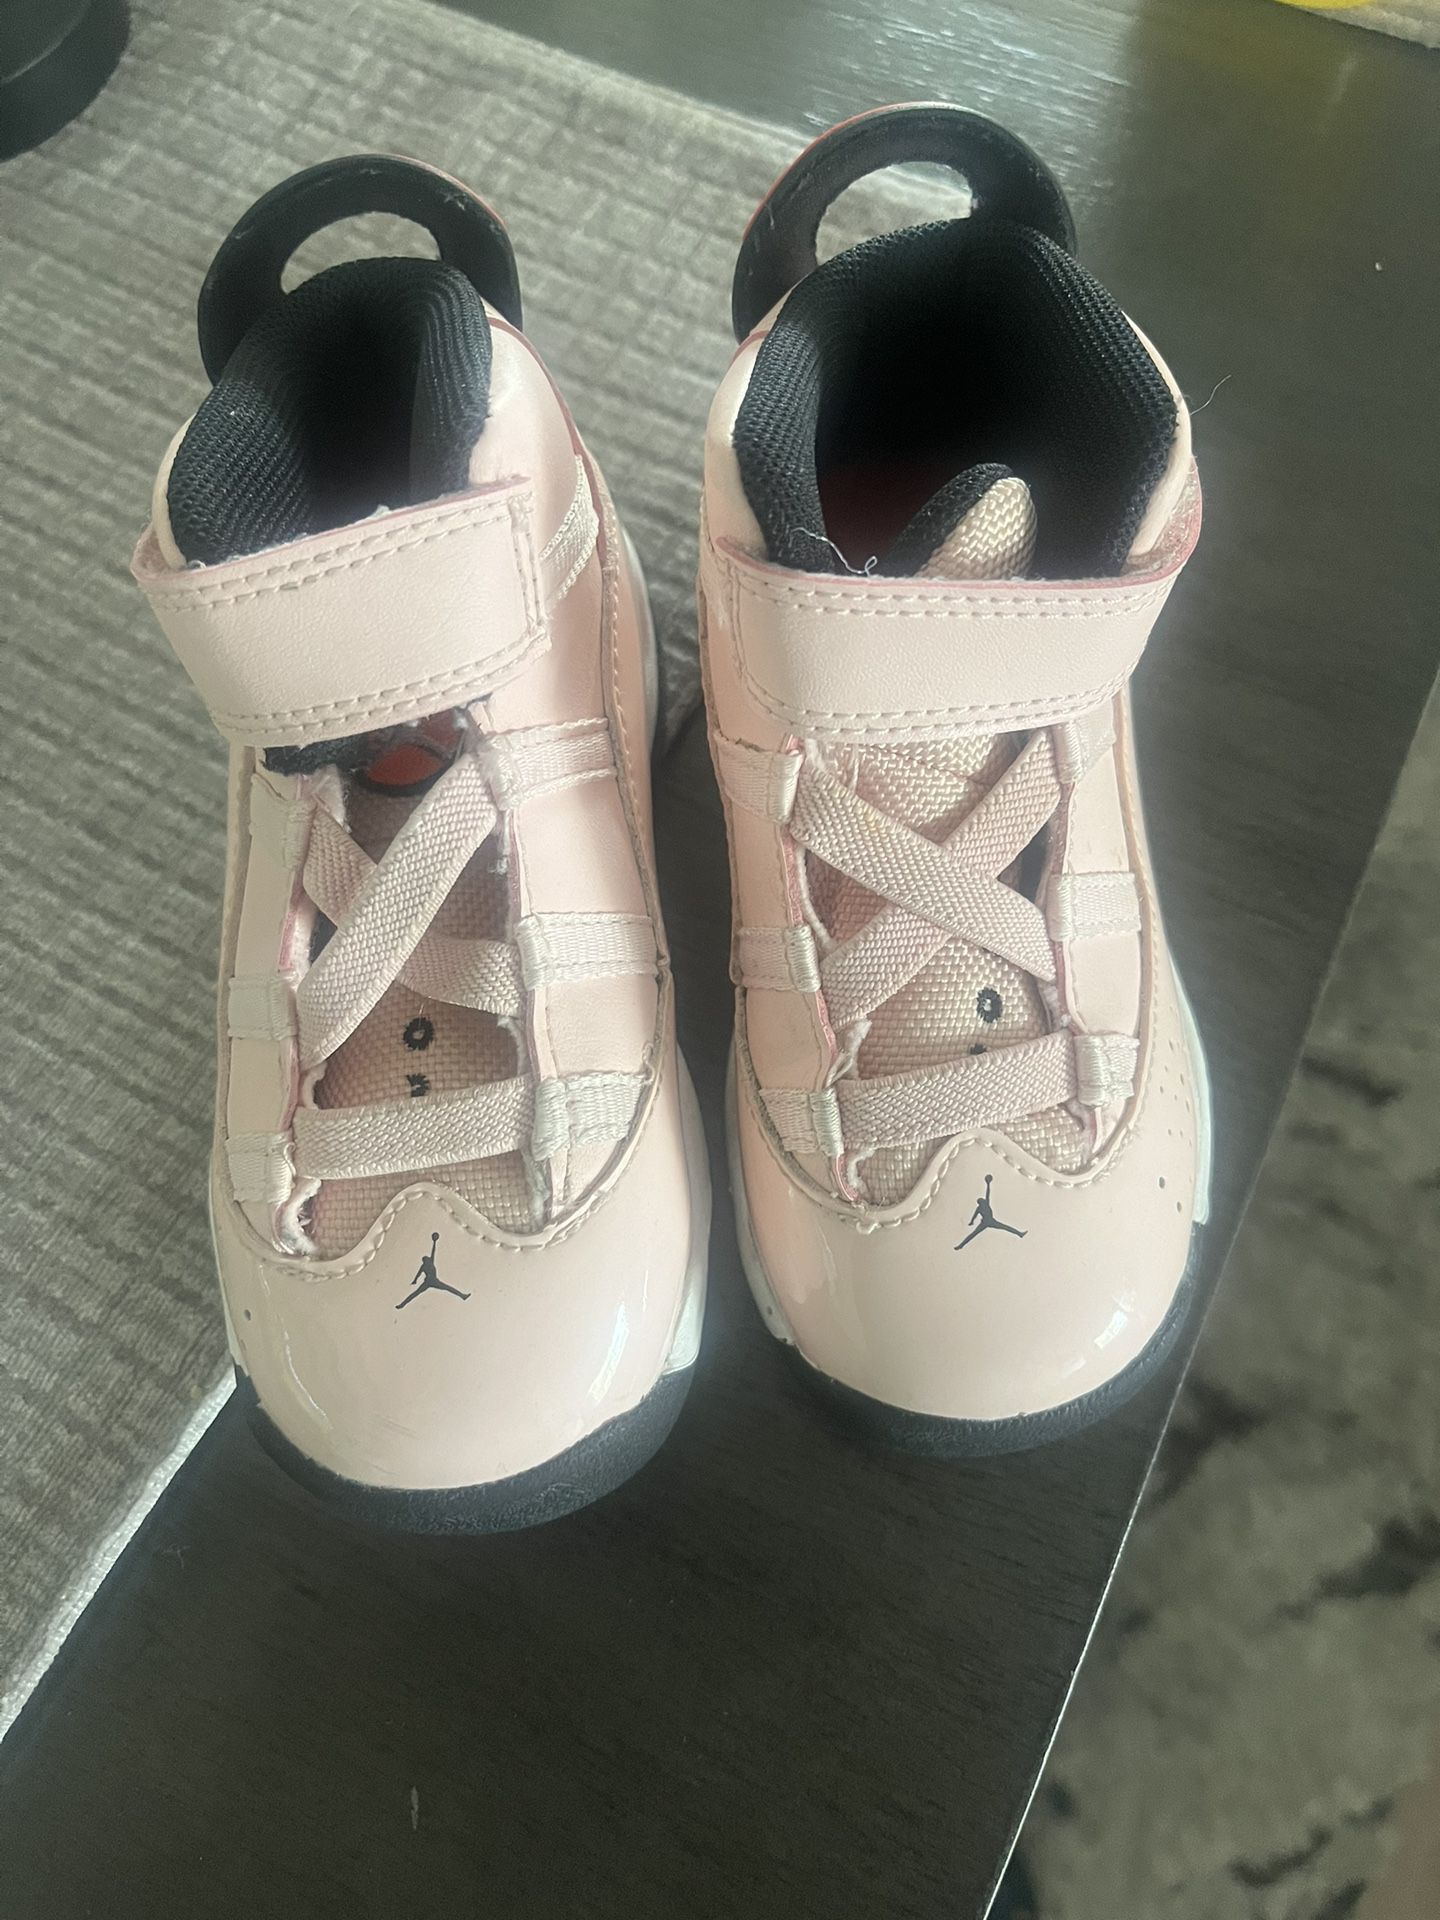 7c Toddler shoes 